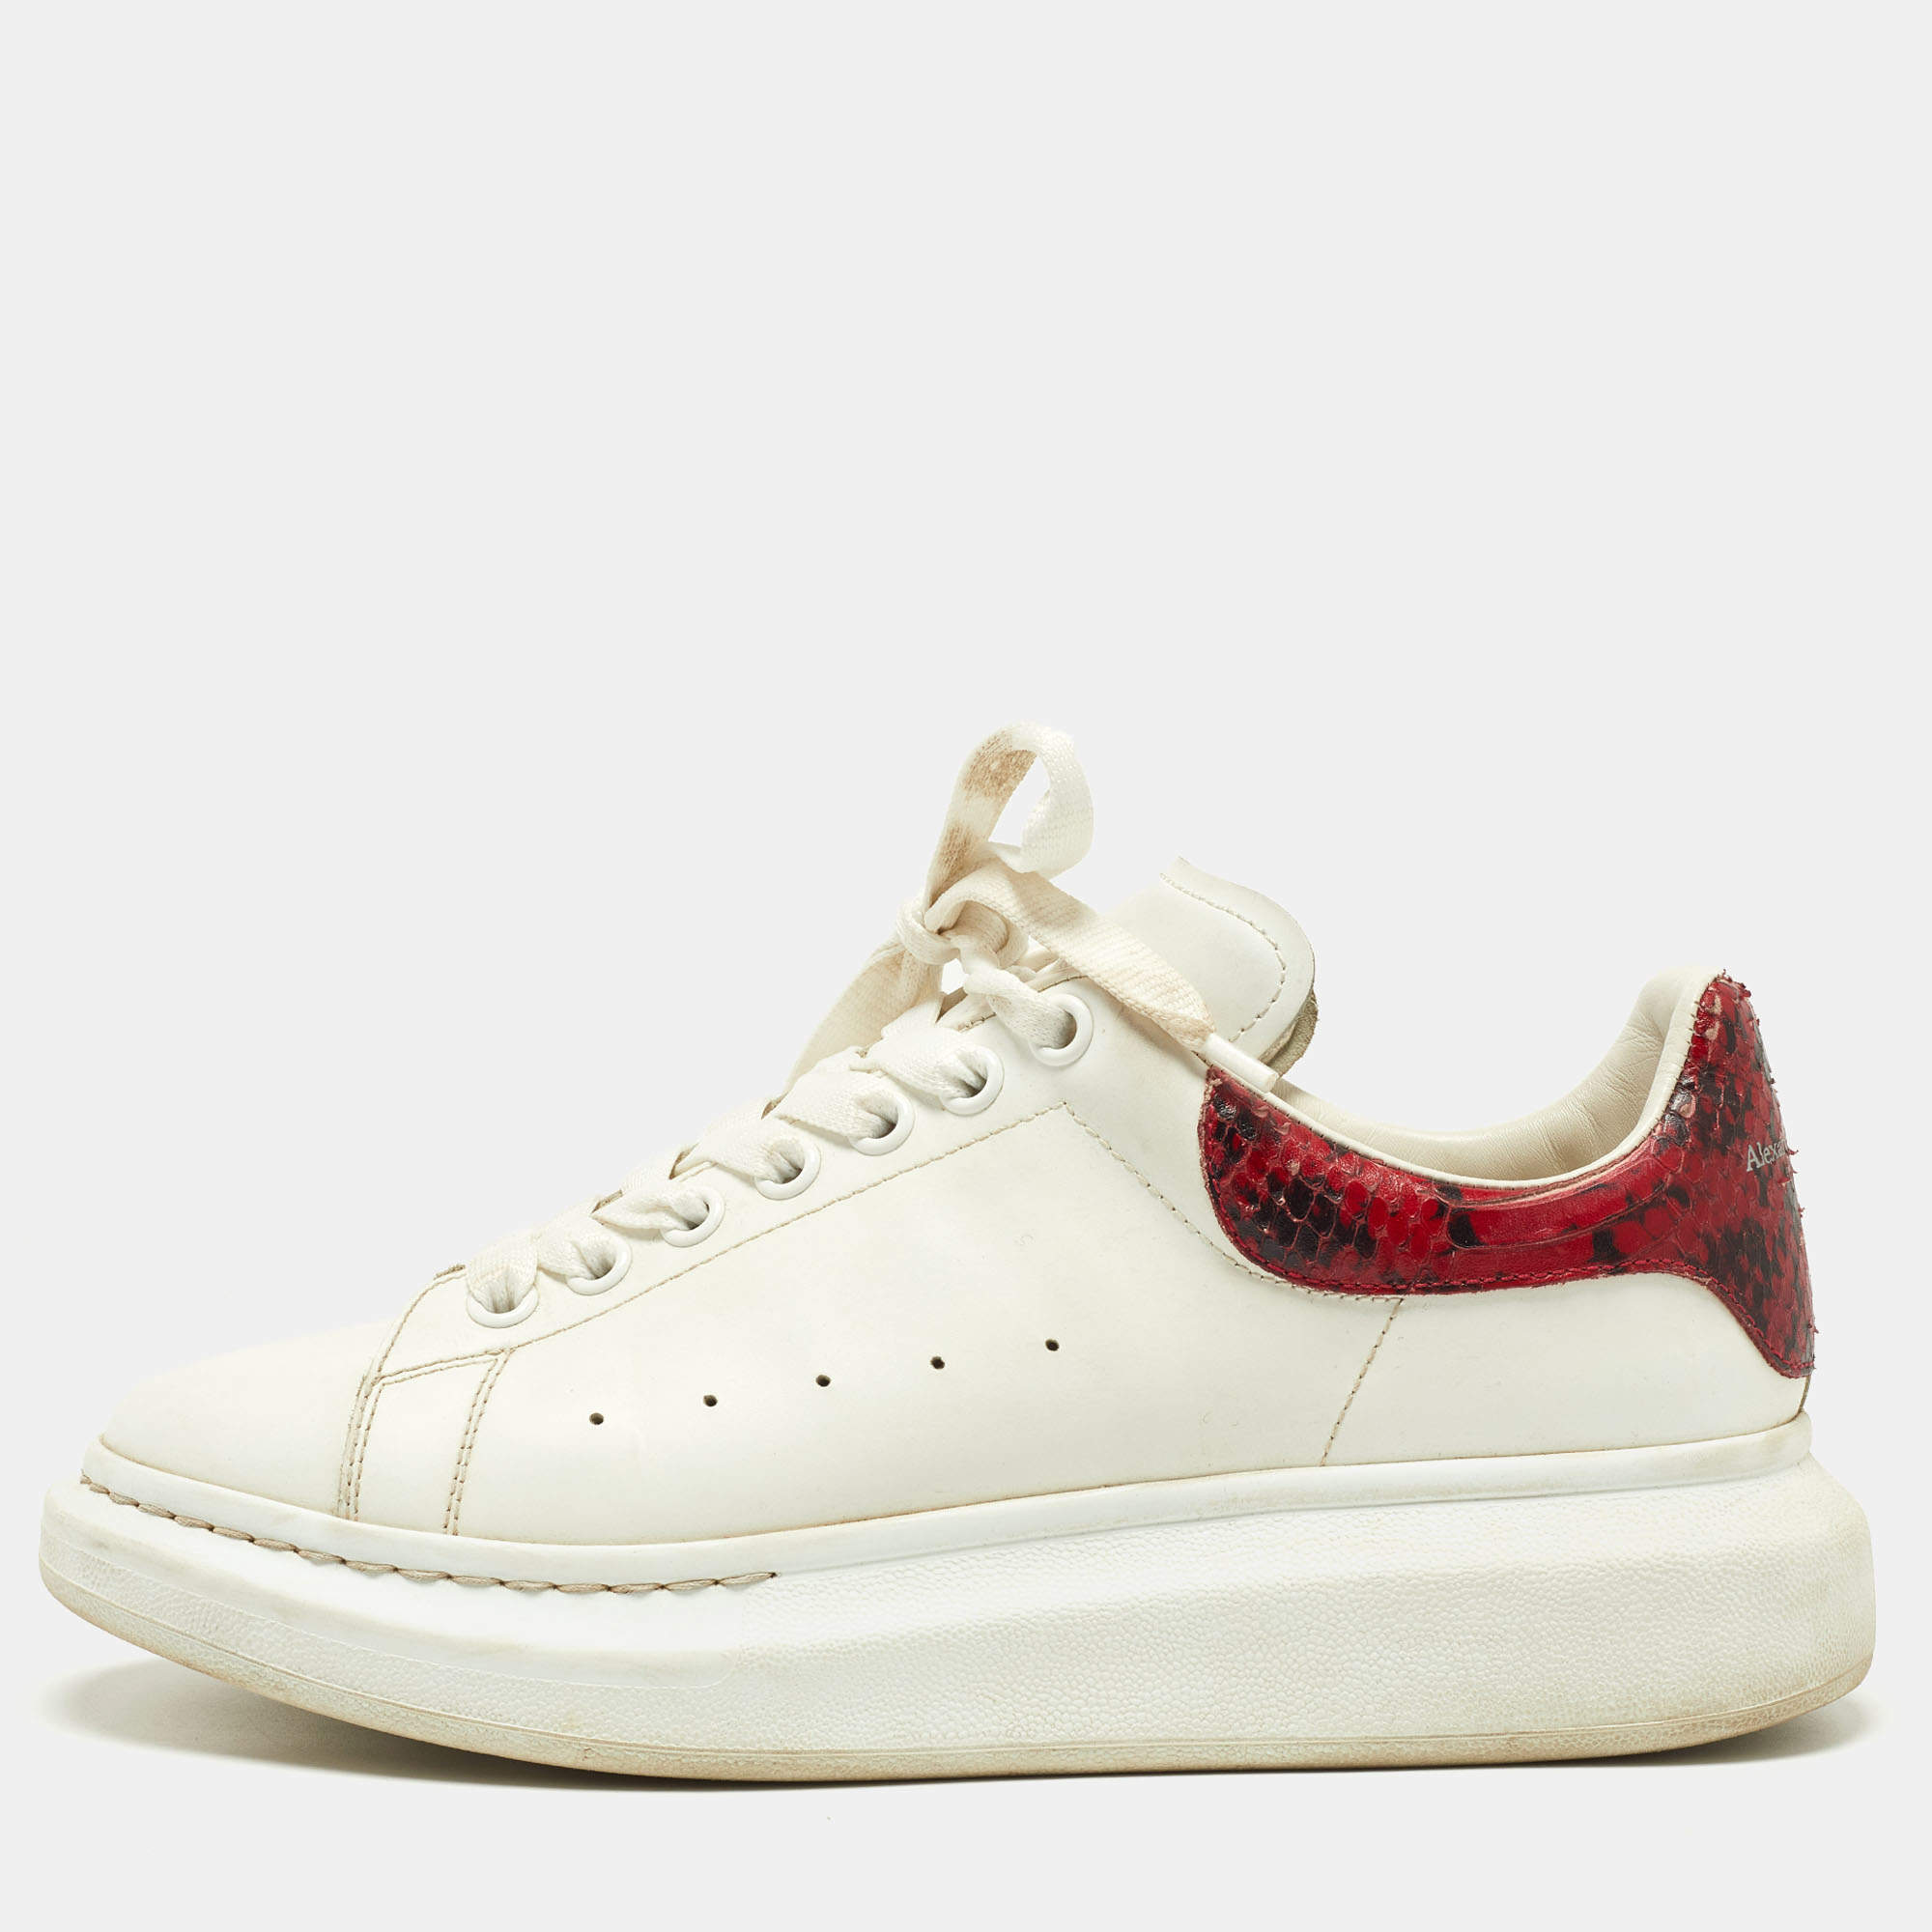 Alexander McQueen White/Red Leather and Watersnake Oversized